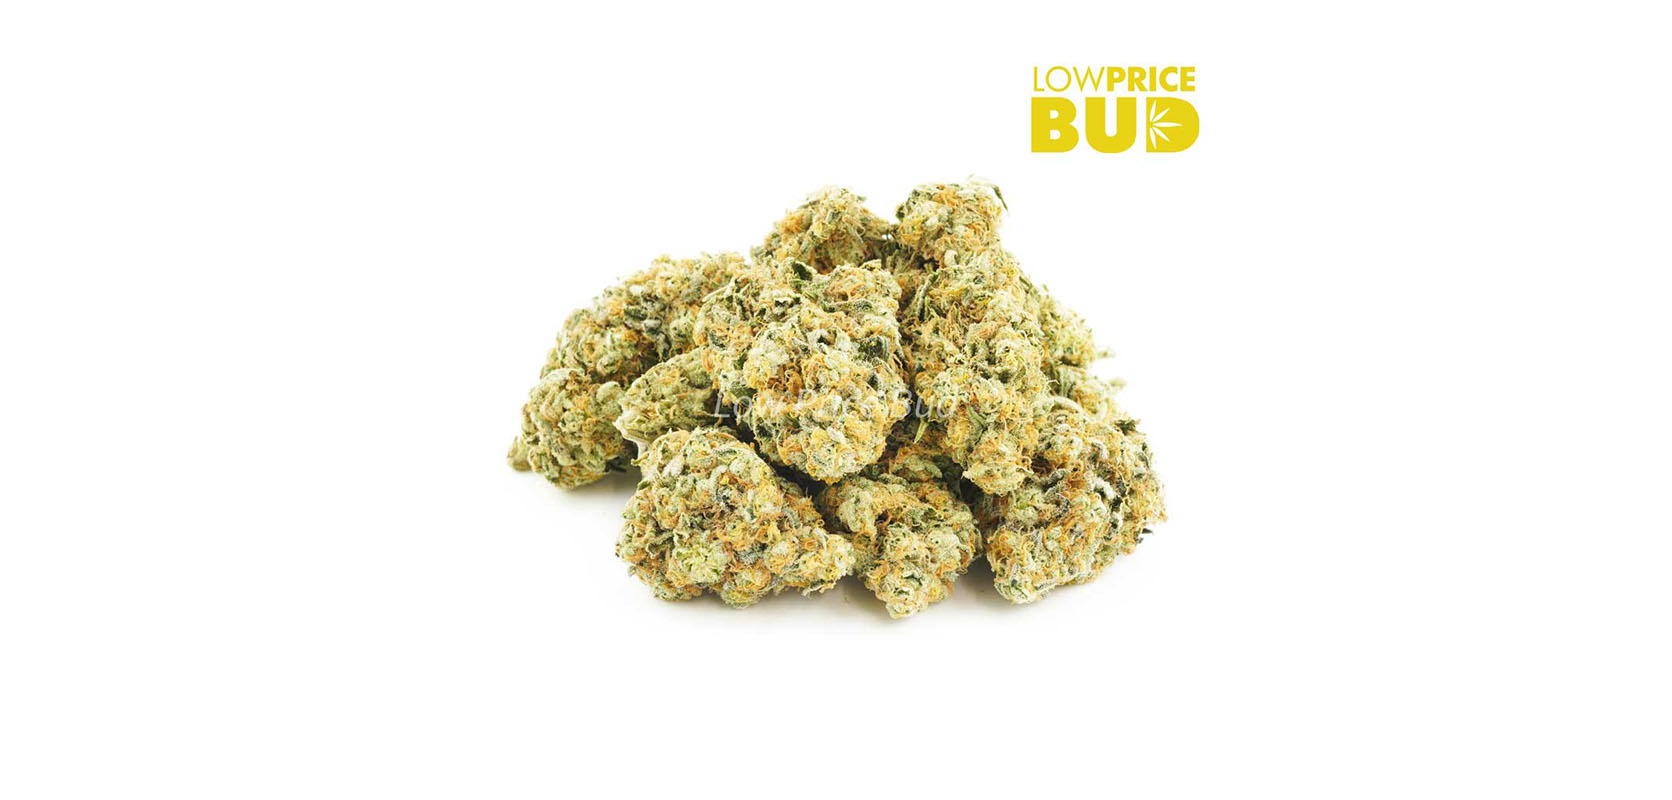 snow white strain cheap bud for sale online dispensary canada